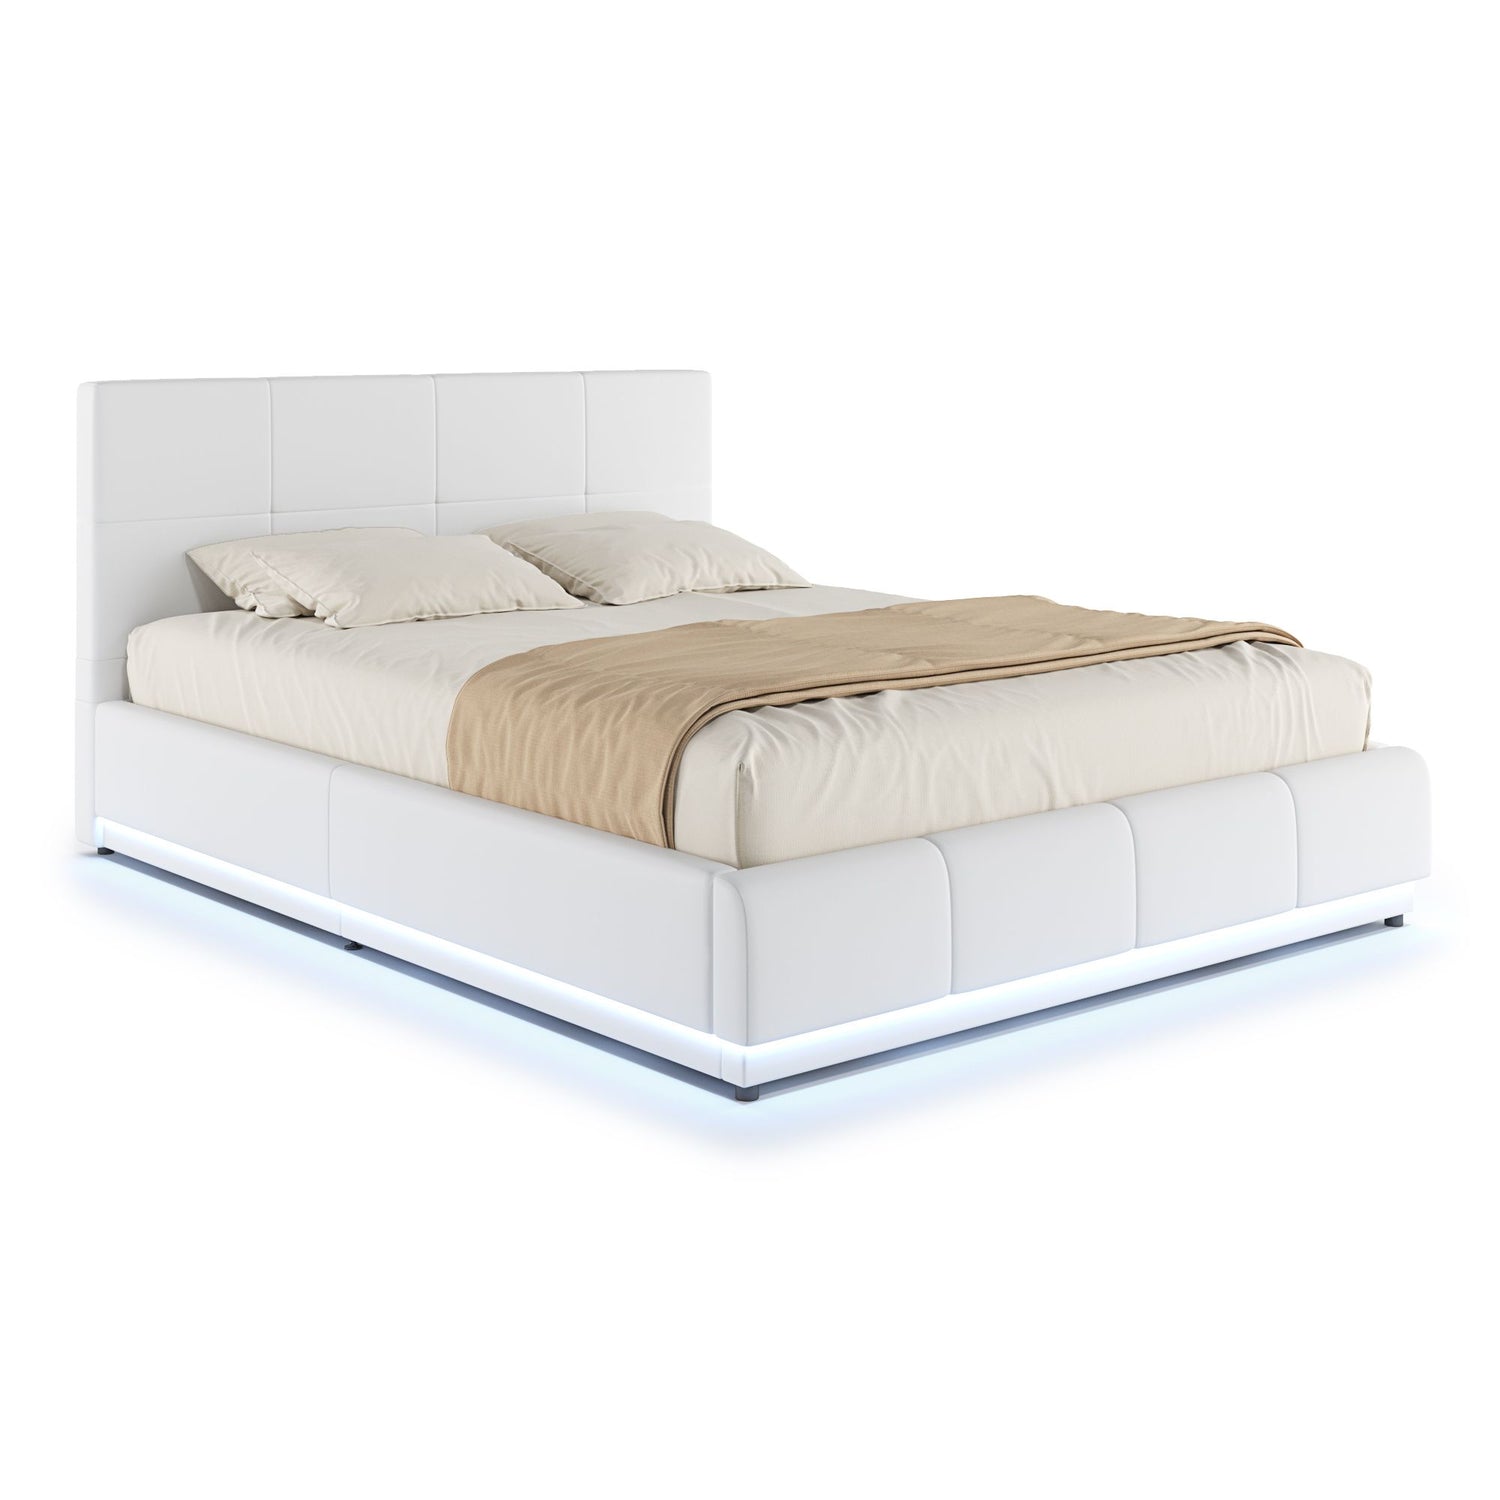 What are Floating Bed Frames?